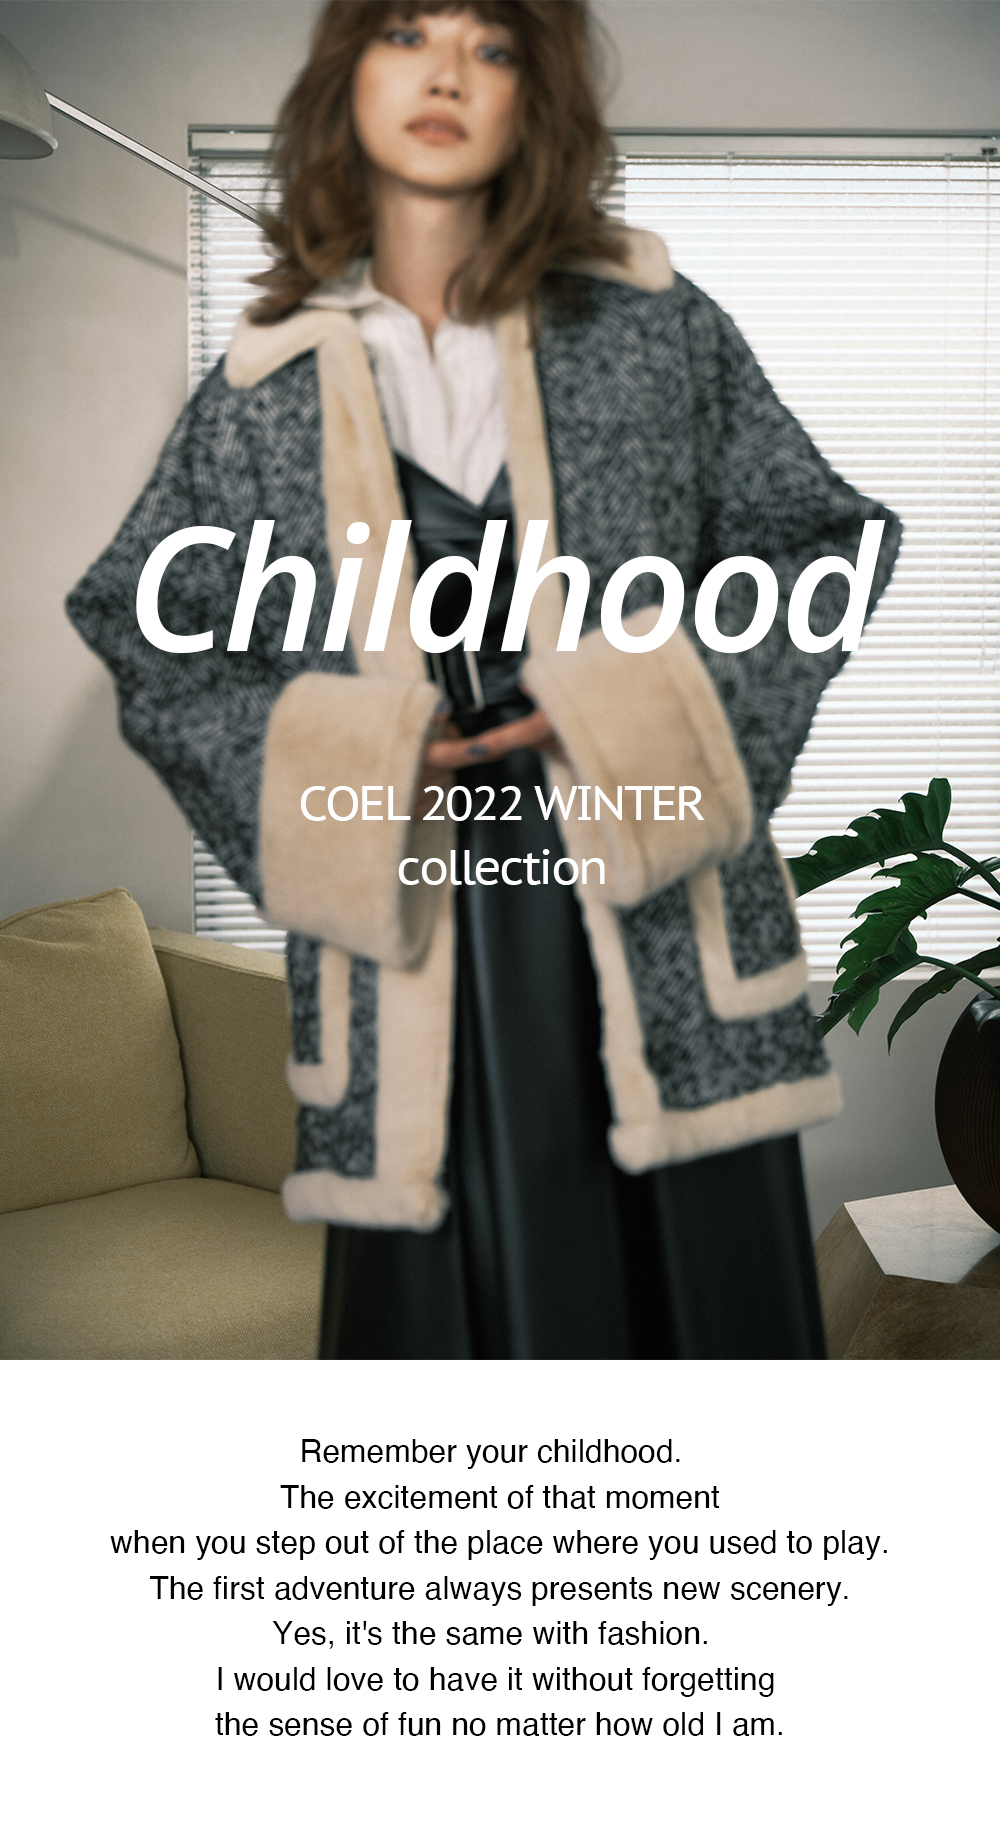 COEL Online Store22 Winter Collection